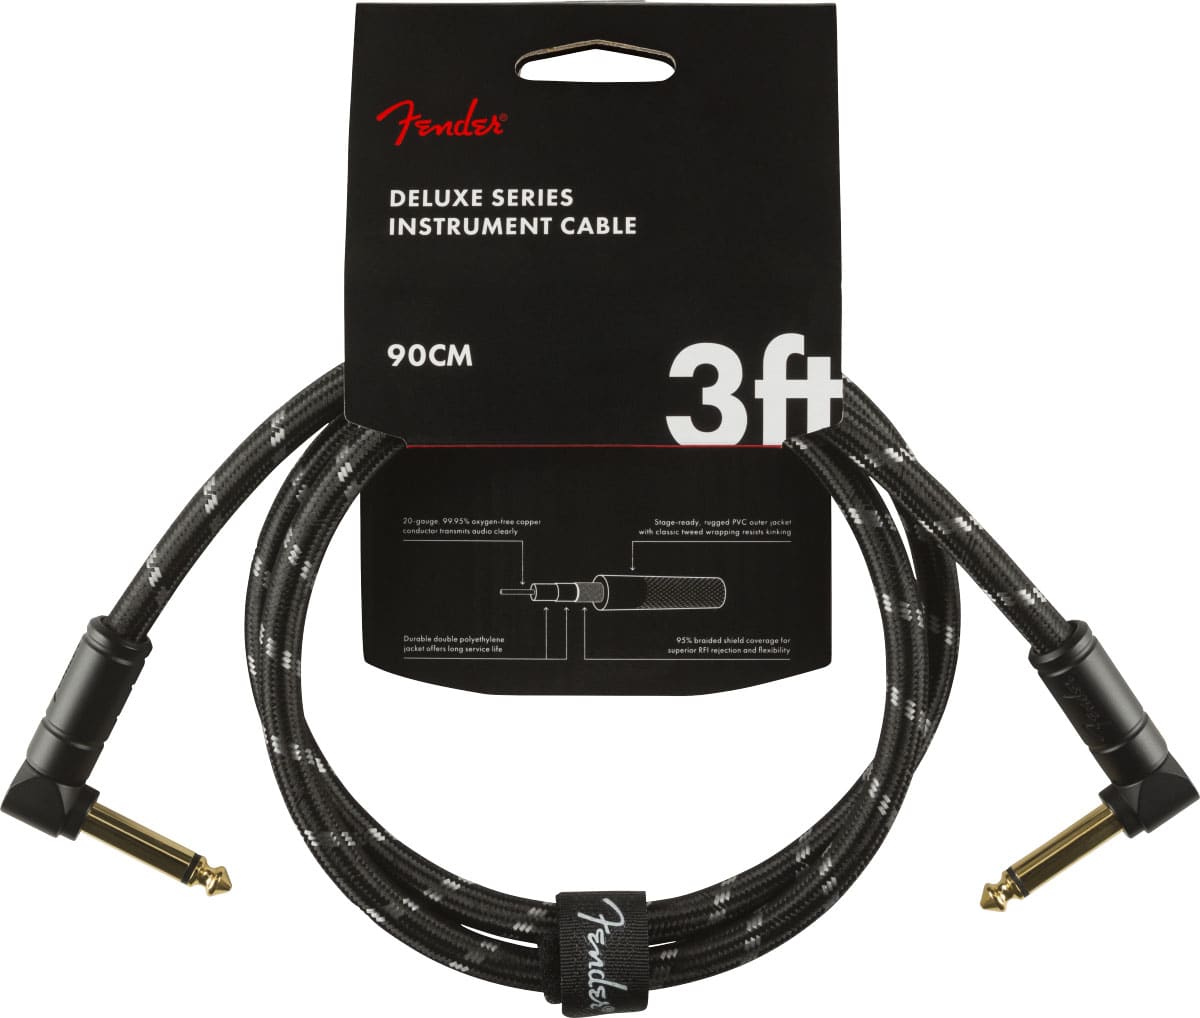 FENDER DELUXE INSTRUMENT CABLE ANGLE/ANGLE 3' BLACK TWEED